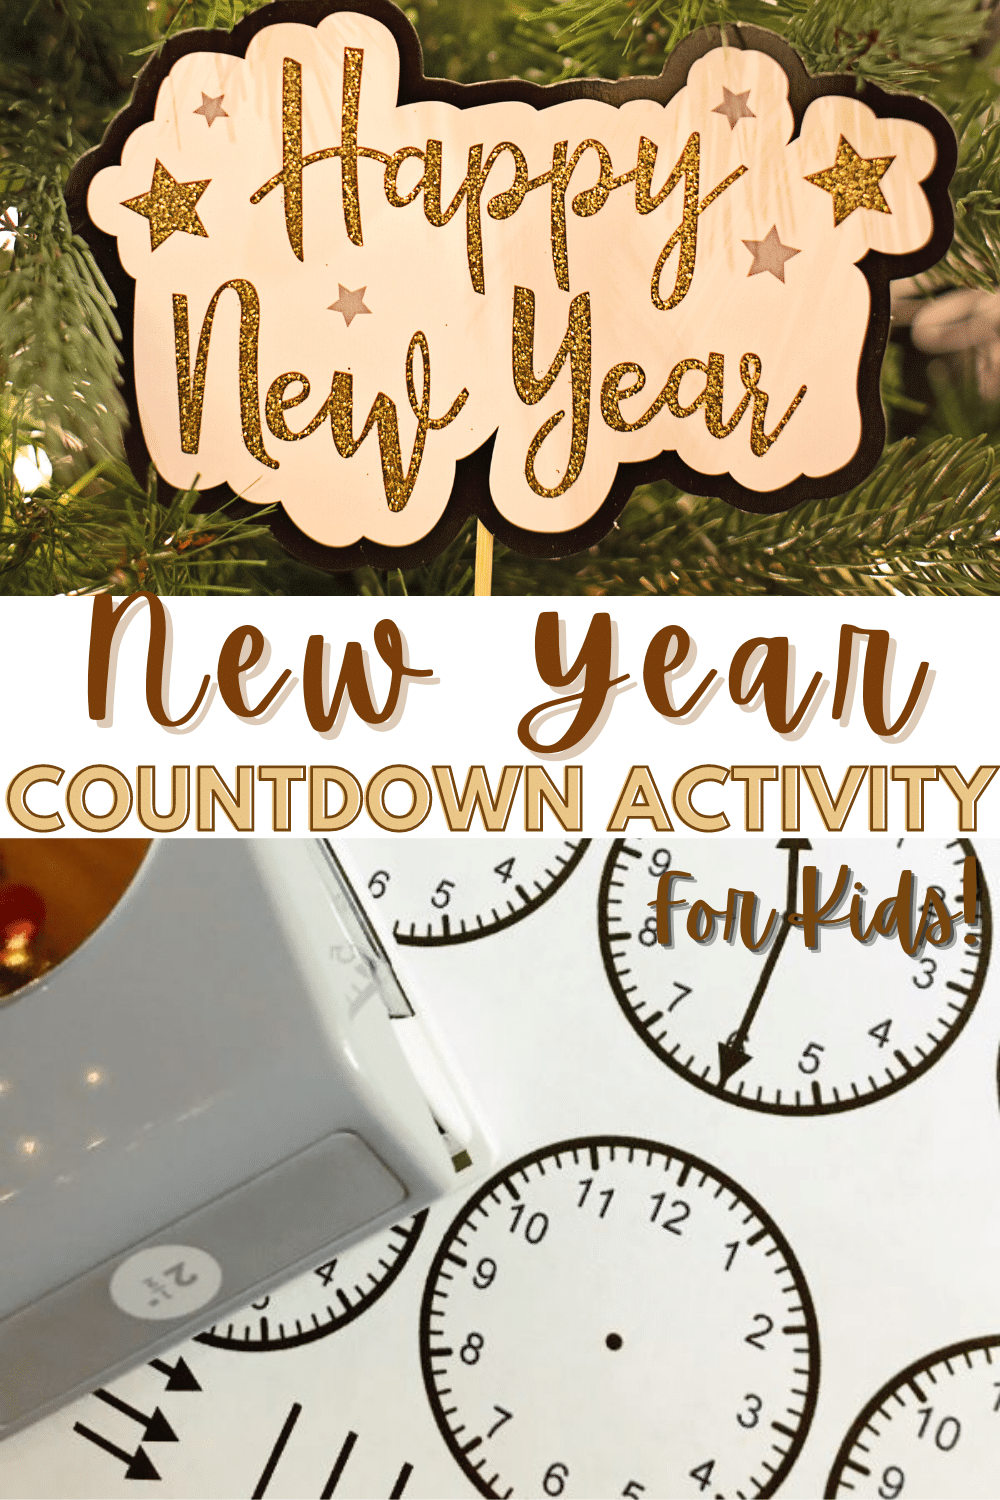 This New Year Countdown Activity for Kids is easy to throw together and will keep kids excited and entertained all evening long on New Year's Eve. #newyearseve #printables #activitiesforkids via @wondermomwannab